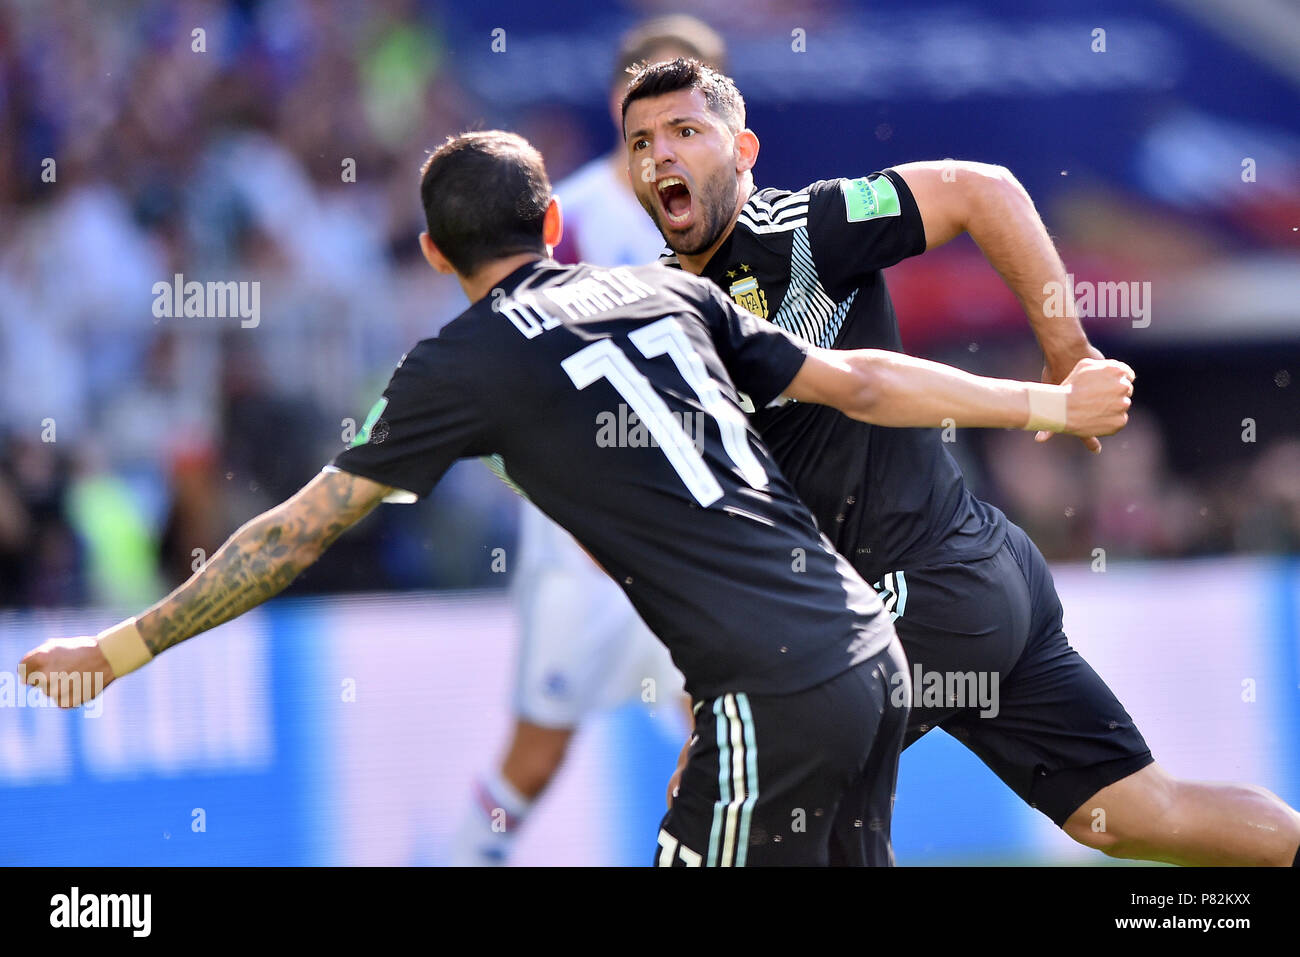 MOSCOW, RUSSIA - JUNE 16: Sergio Aguero of Argentina celebrates scoring a goal during the 2018 FIFA World Cup Russia group D match between Argentina and Iceland at Spartak Stadium on June 16, 2018 in Moscow, Russia. (Photo by Lukasz Laskowski/PressFocus/MB Media) Stock Photo